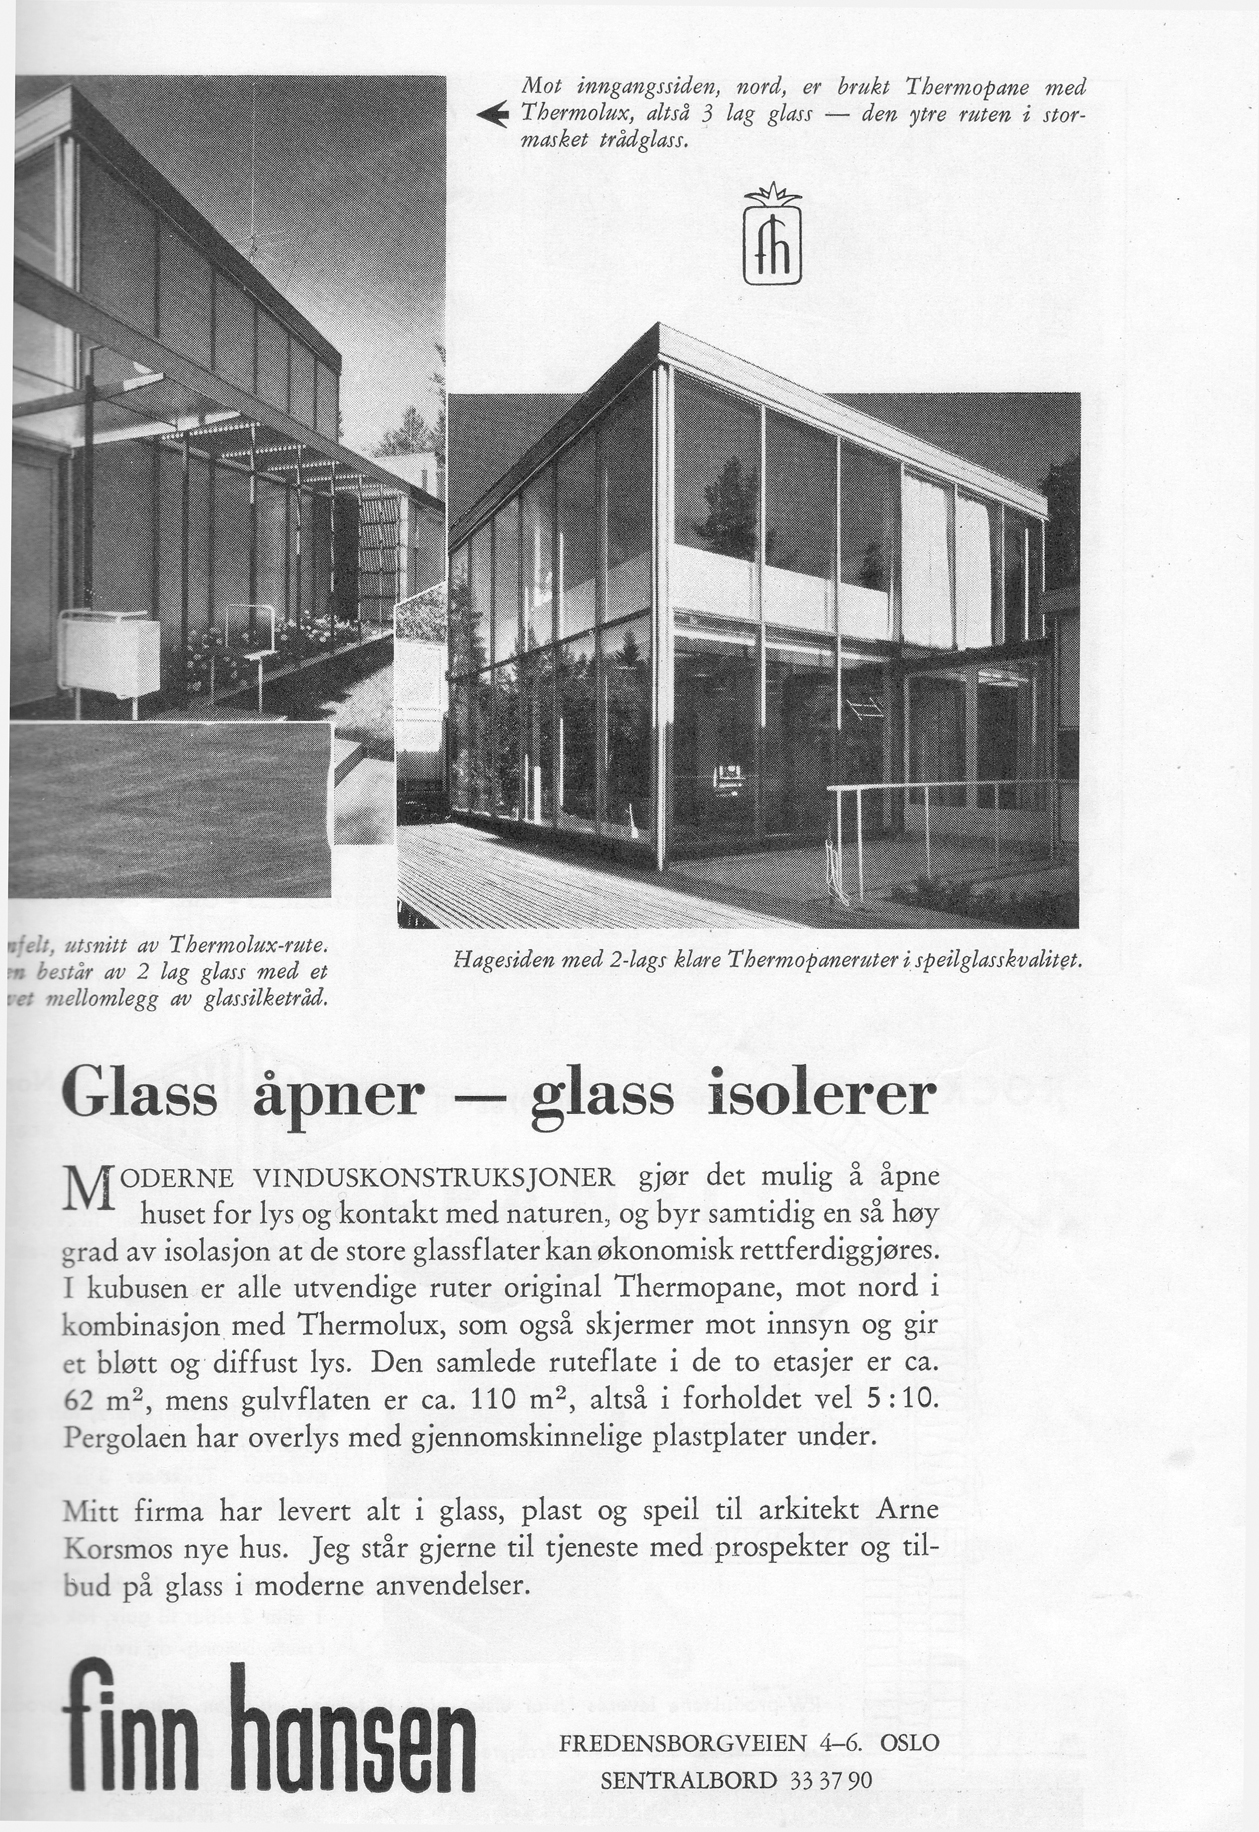 Manufacturers of modern construction materials, such as Finn Hansen Thermopane windows (featured here), used Korsmo’s and Norberg-Schulz’s houses in their advertising. From Byggekunst, n.7 (1955).